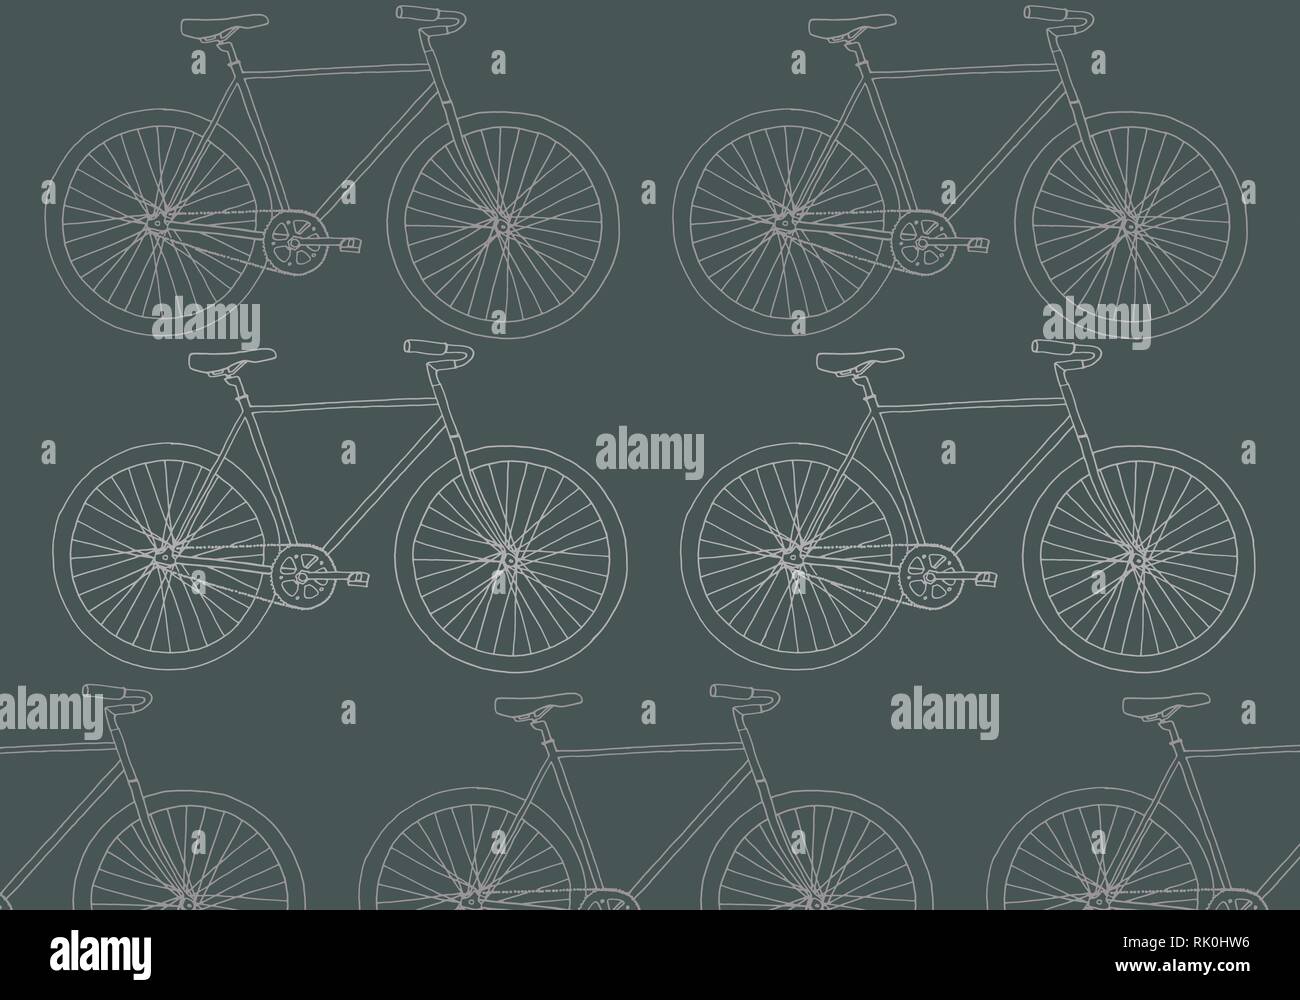 Hand drawn hipster bike vector pattern illustration in gray colors palette Stock Vector